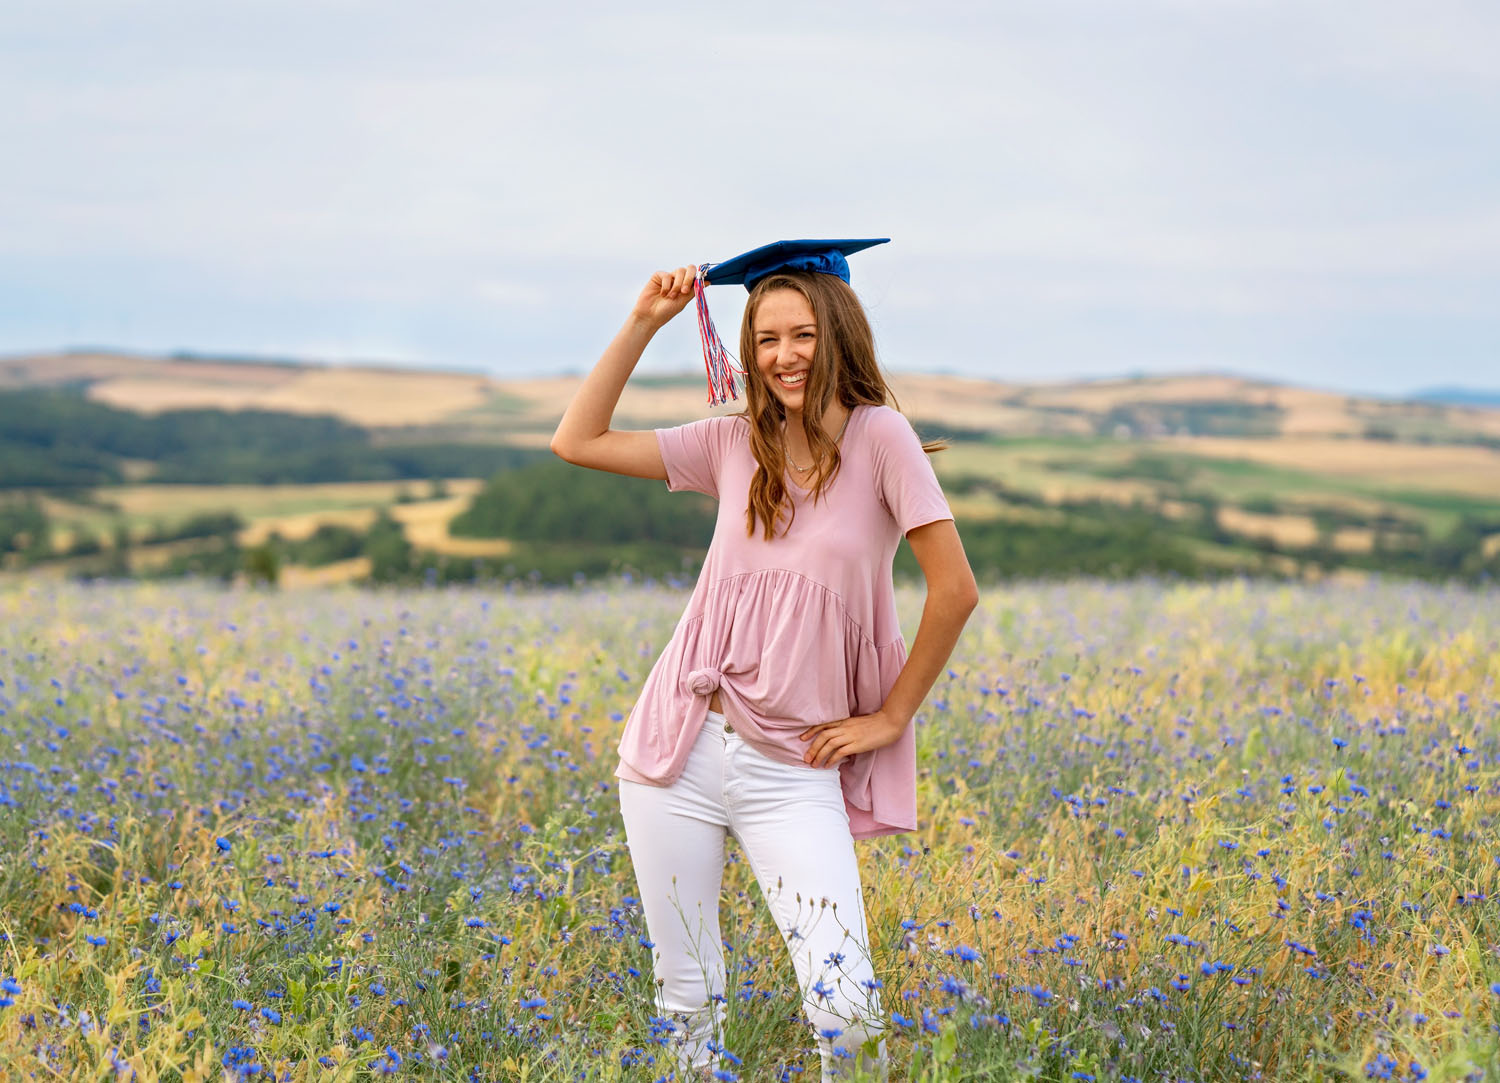  Ramstein High School Senior girl summer Session in Eulenbis with young woman celebrating her milestone with an outdoor photo session by photographer Sarah Havens from the KMC area, Germany  Schulabschluss Fotoshooting mit junger Frau in Sommer in Fe